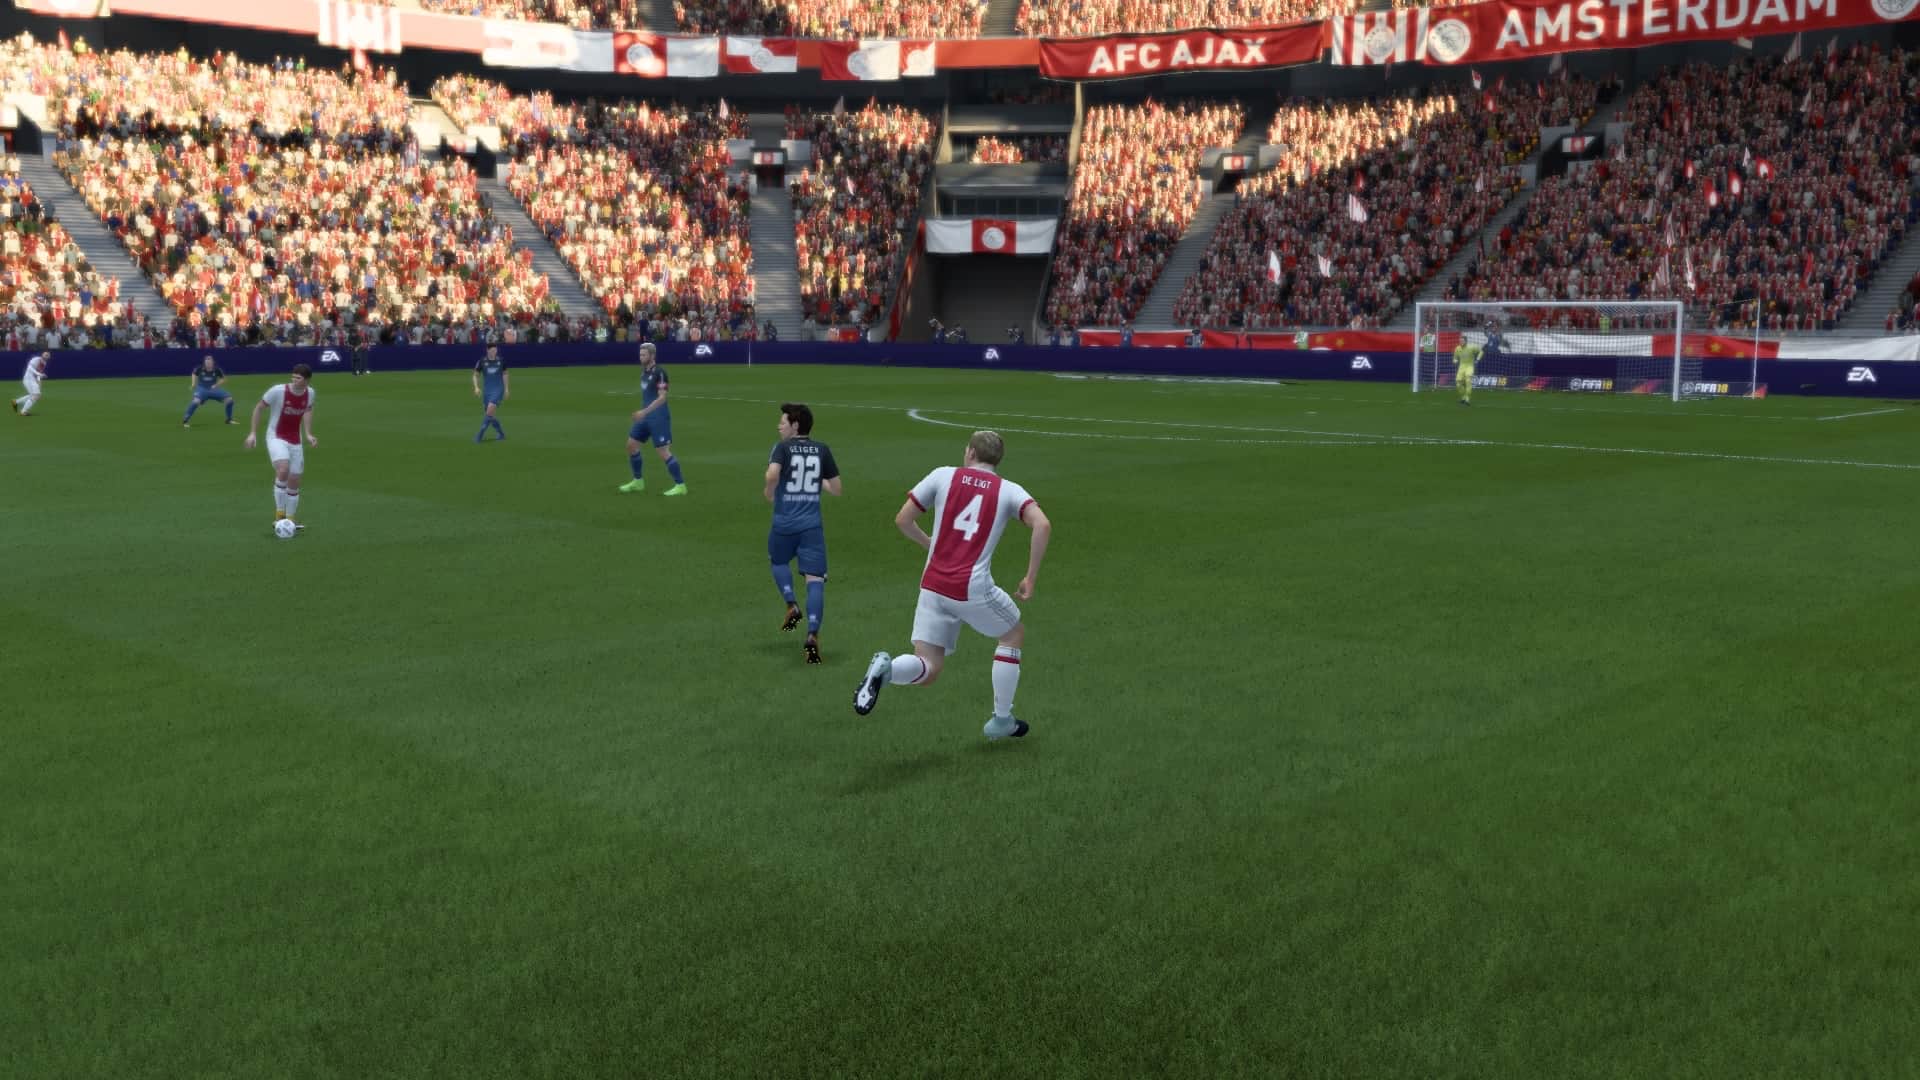 Matthis de Ligt plays a one-two